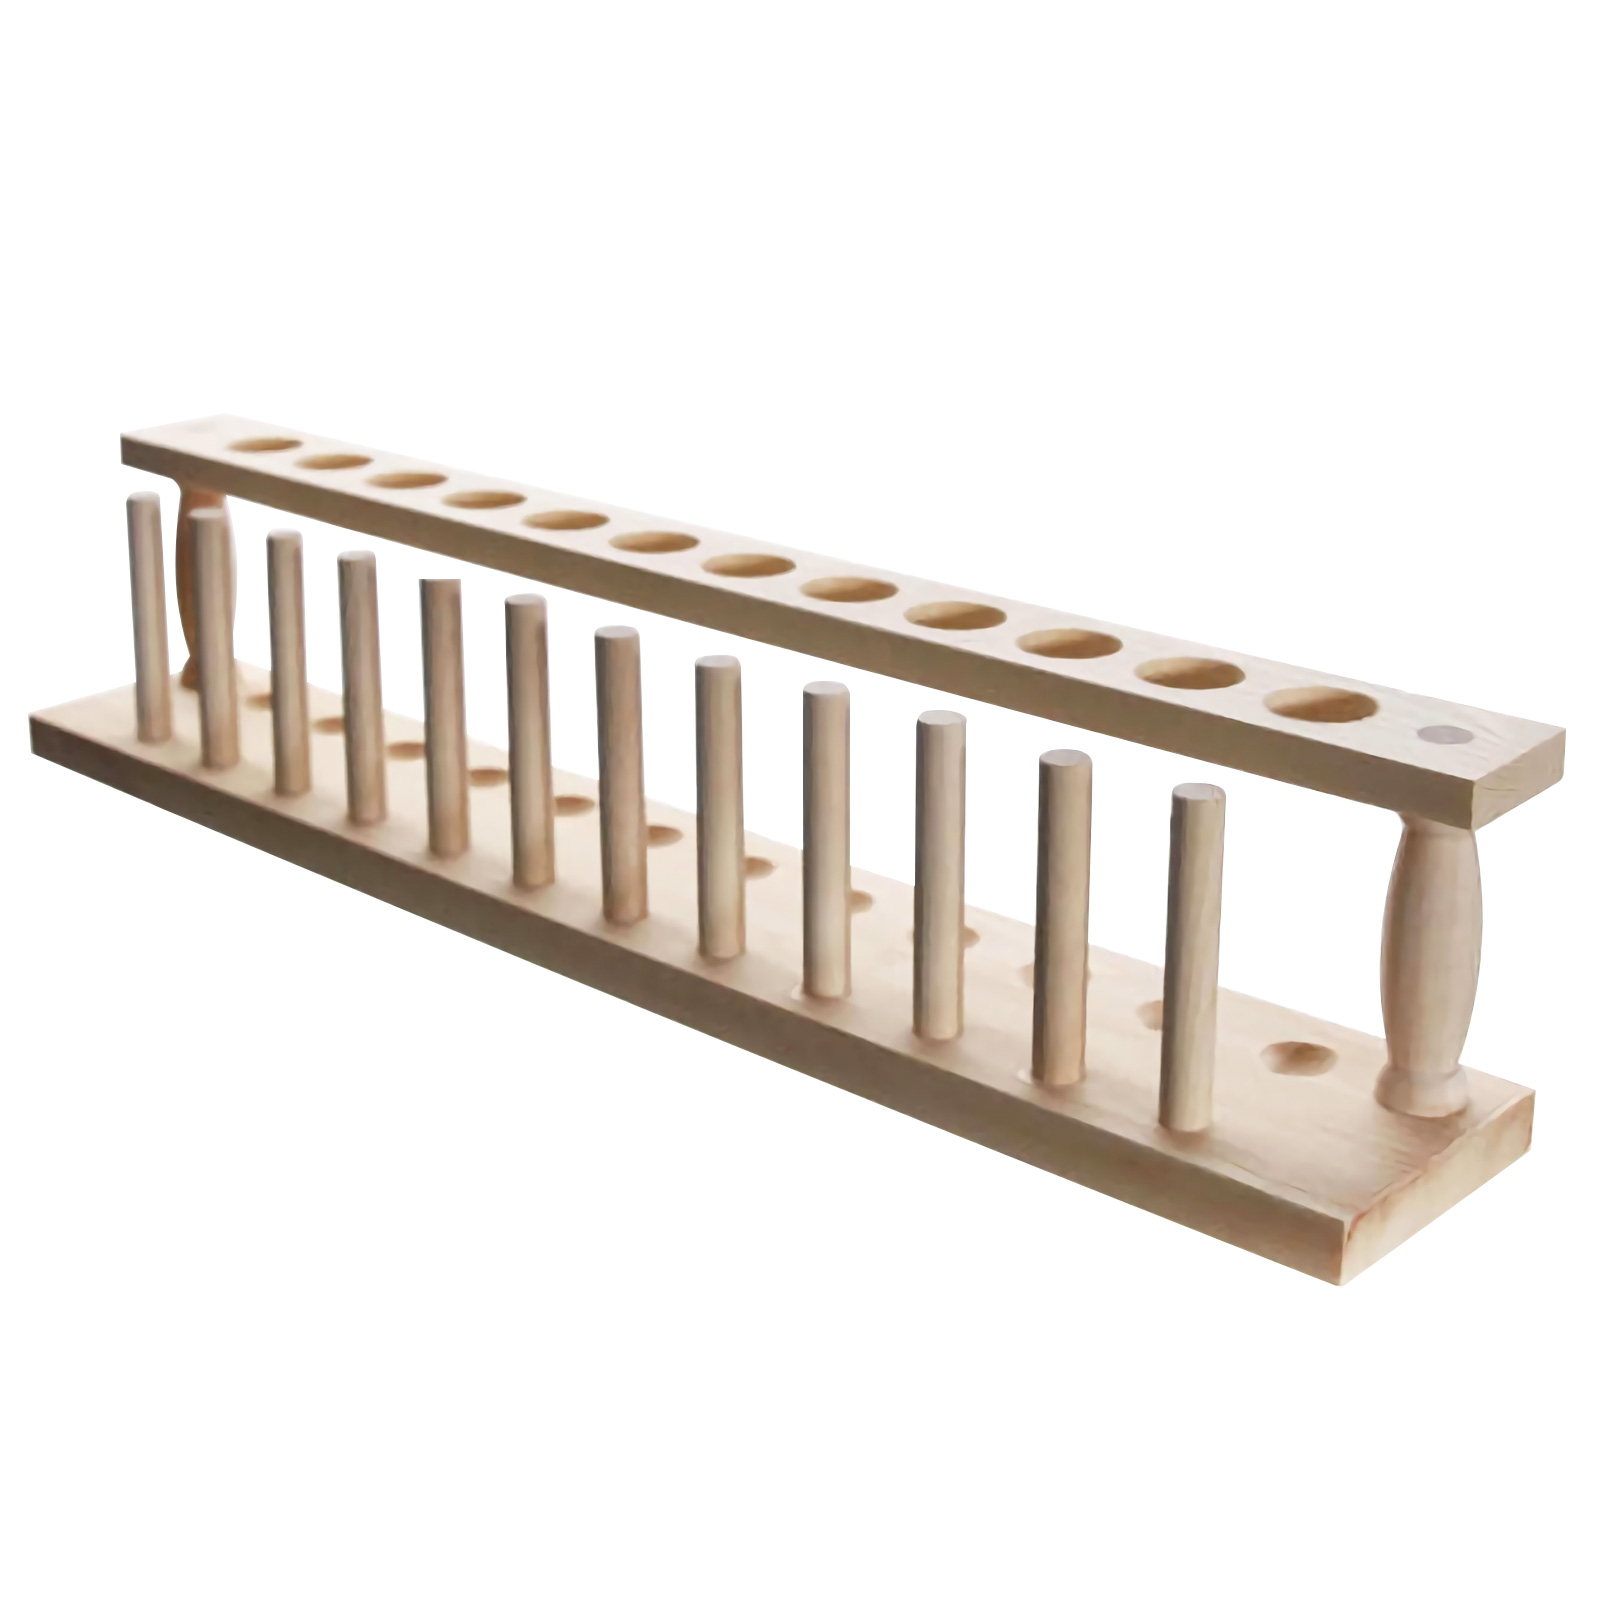 ADAMAS BETA Wooden Test Tube Rack 6-12Well with Stand Sticks Hole Diameter 22mm for Laboratory Tube Storage/Drying Holder